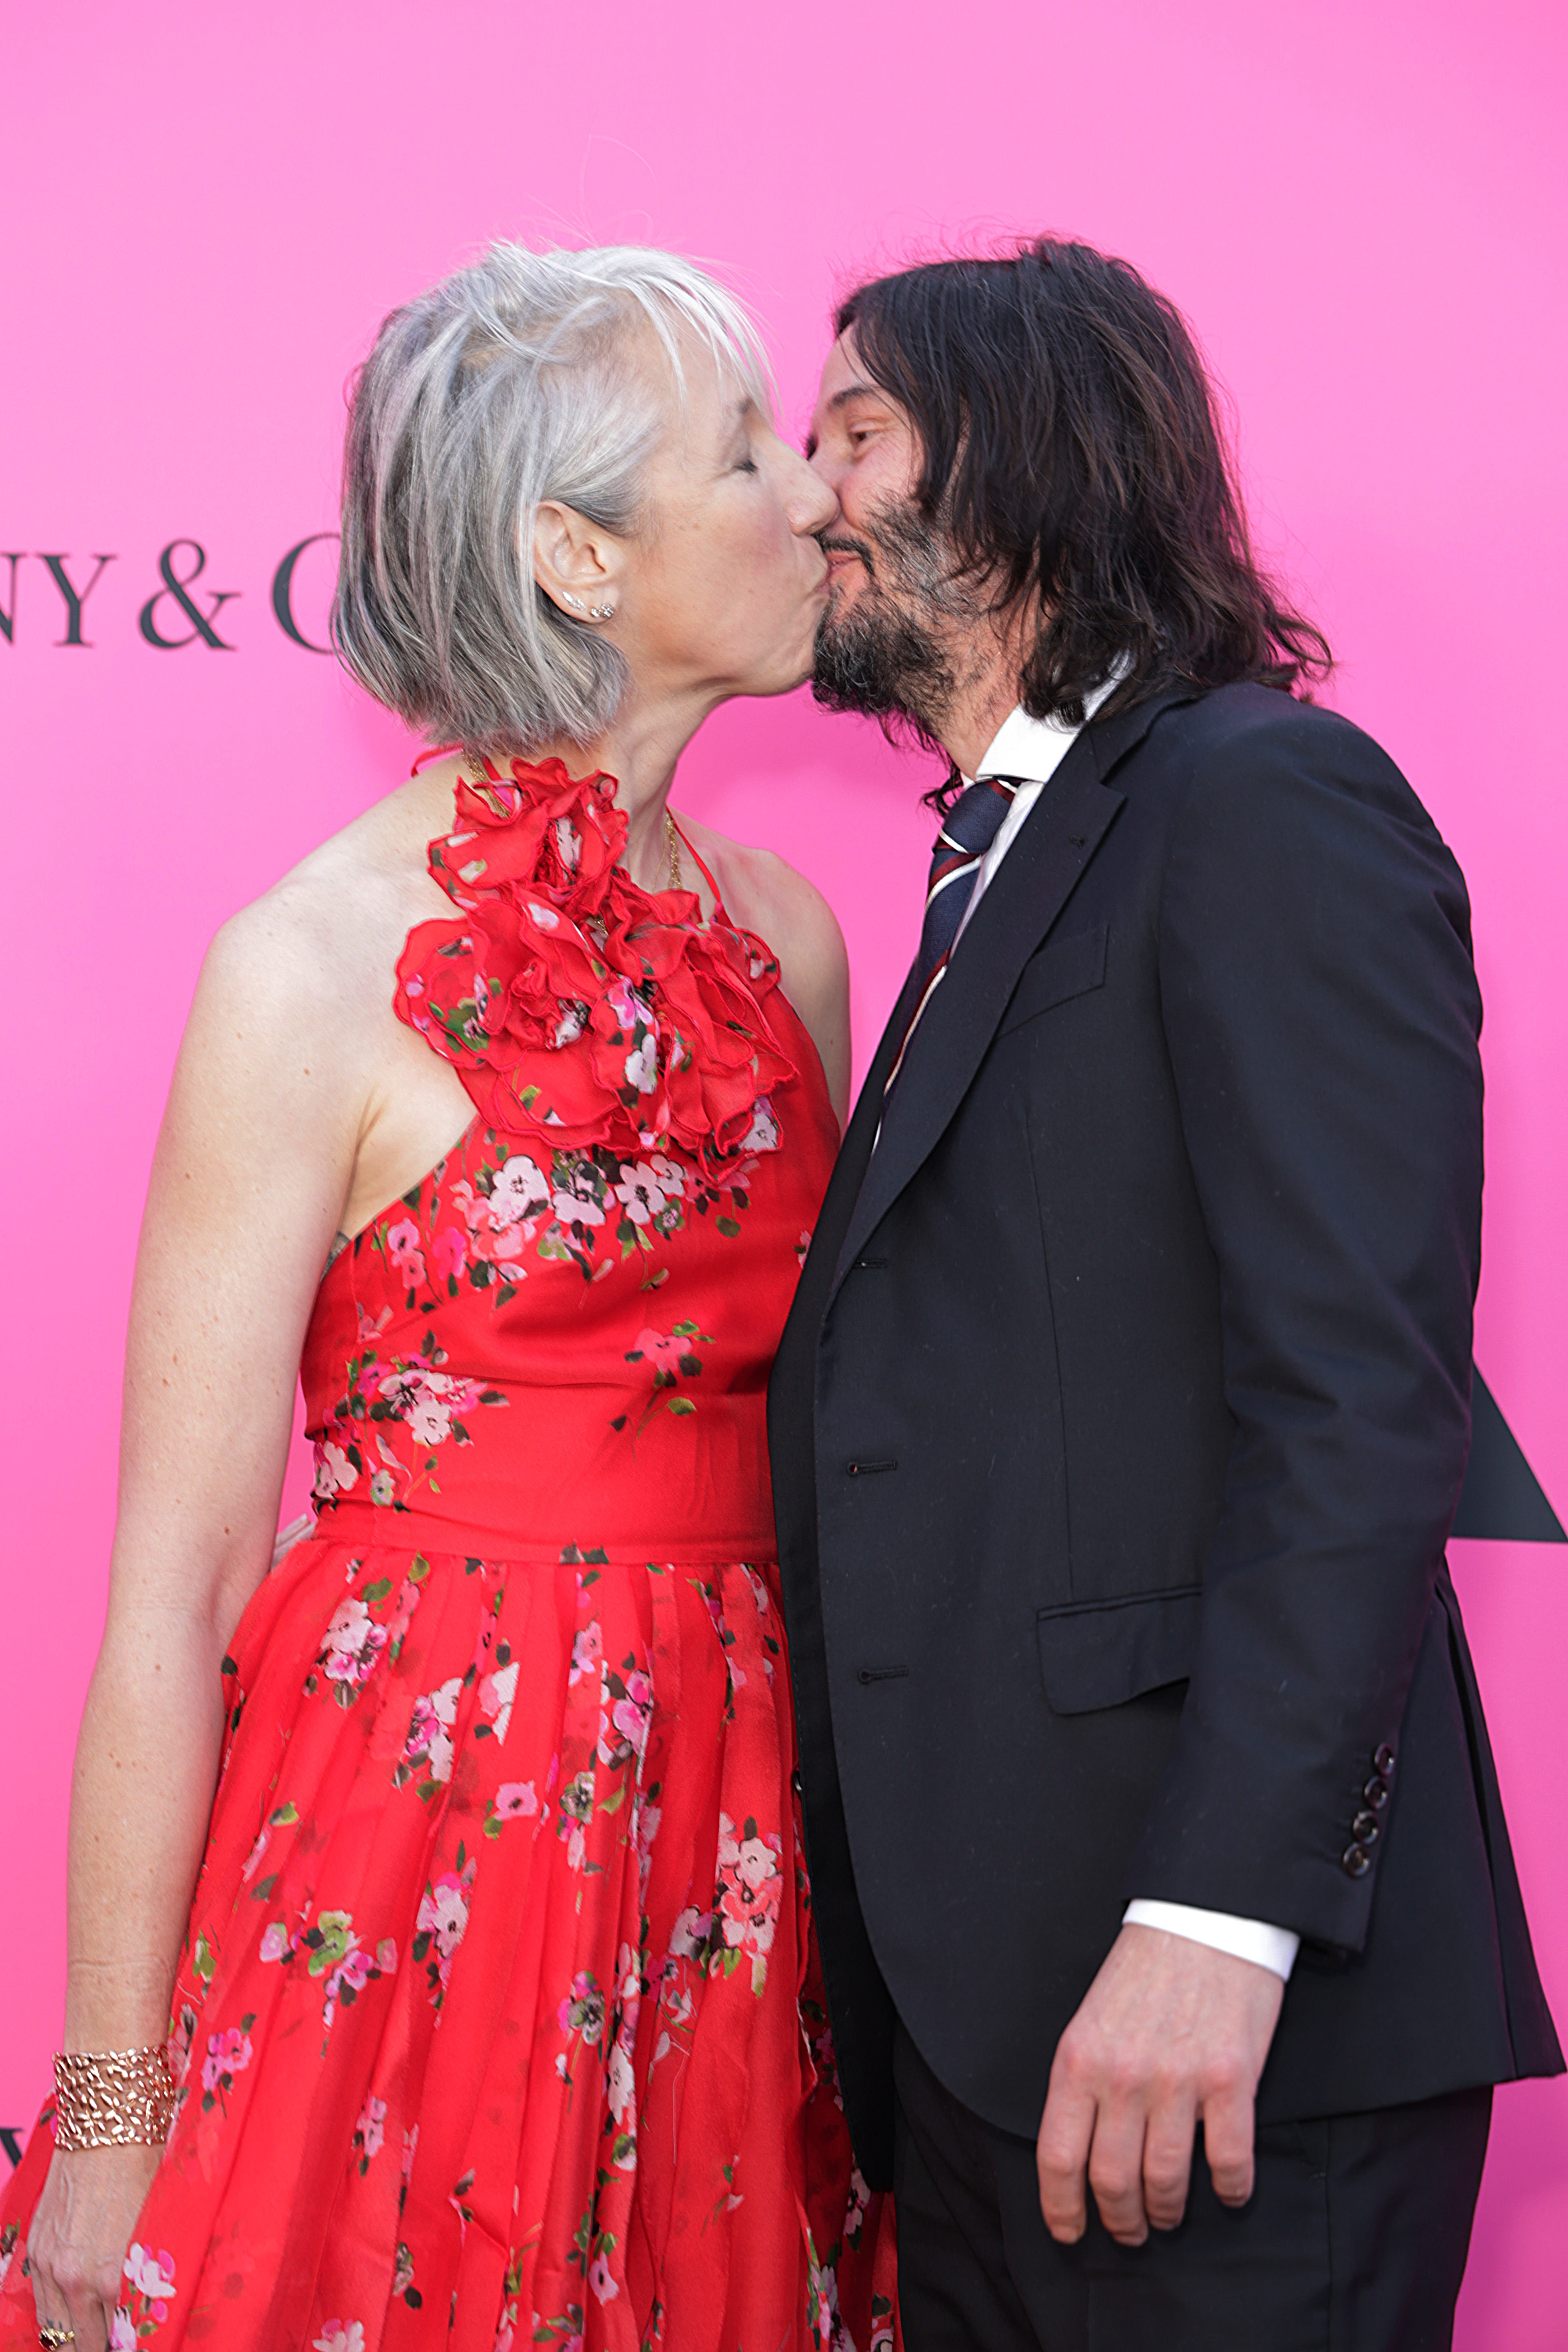 The couple kissing on the red carpet